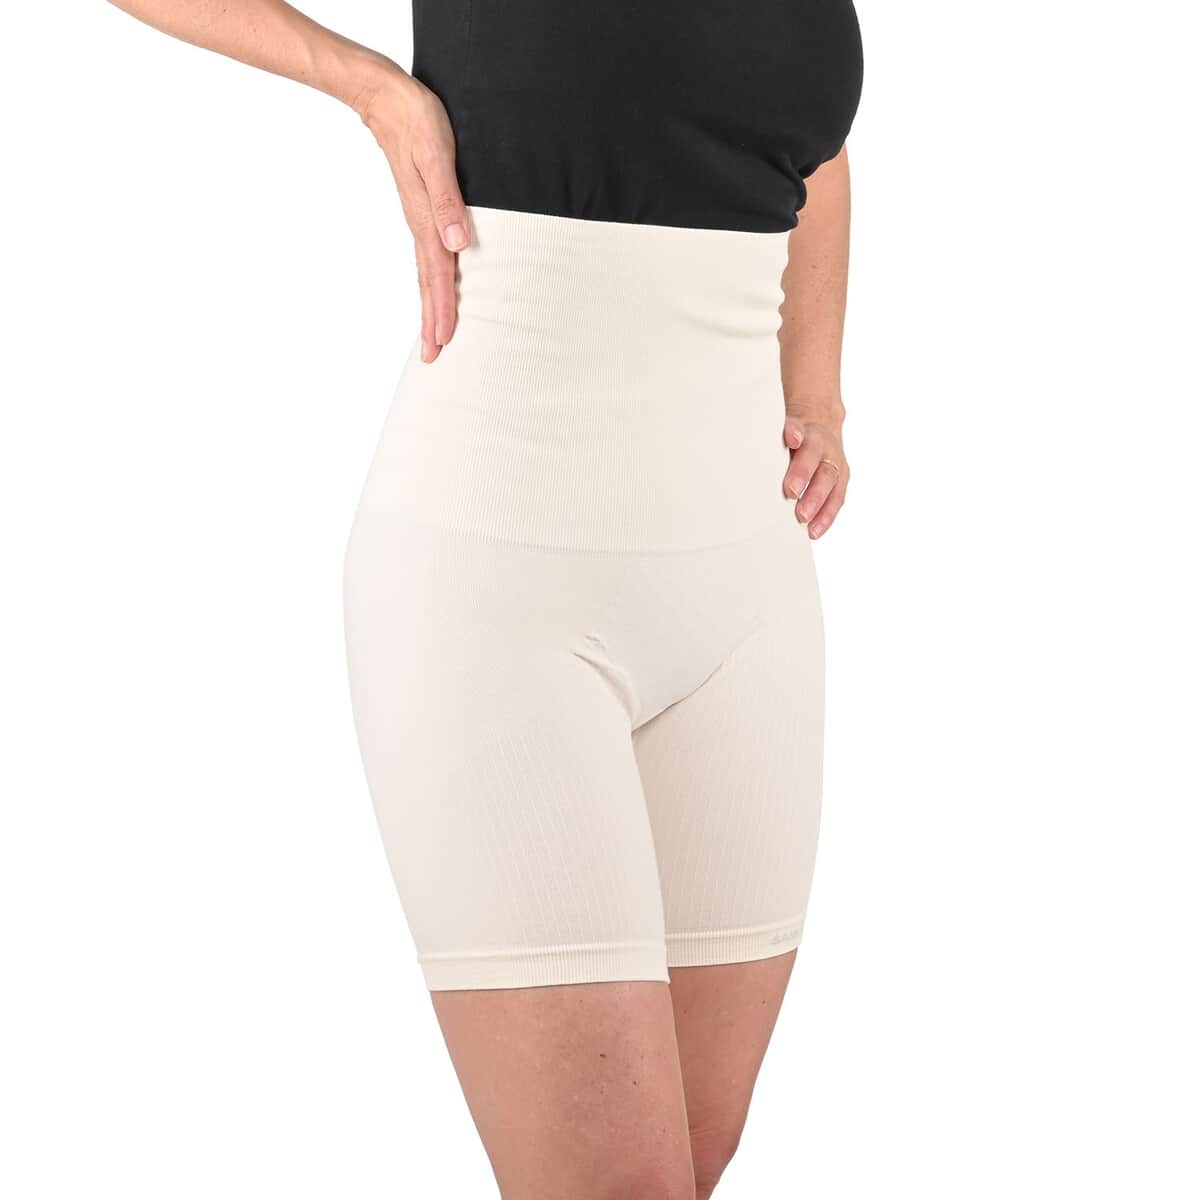 SANKOM Patent Organic Cotton Mid-Thigh Shapers - S/M | White image number 3